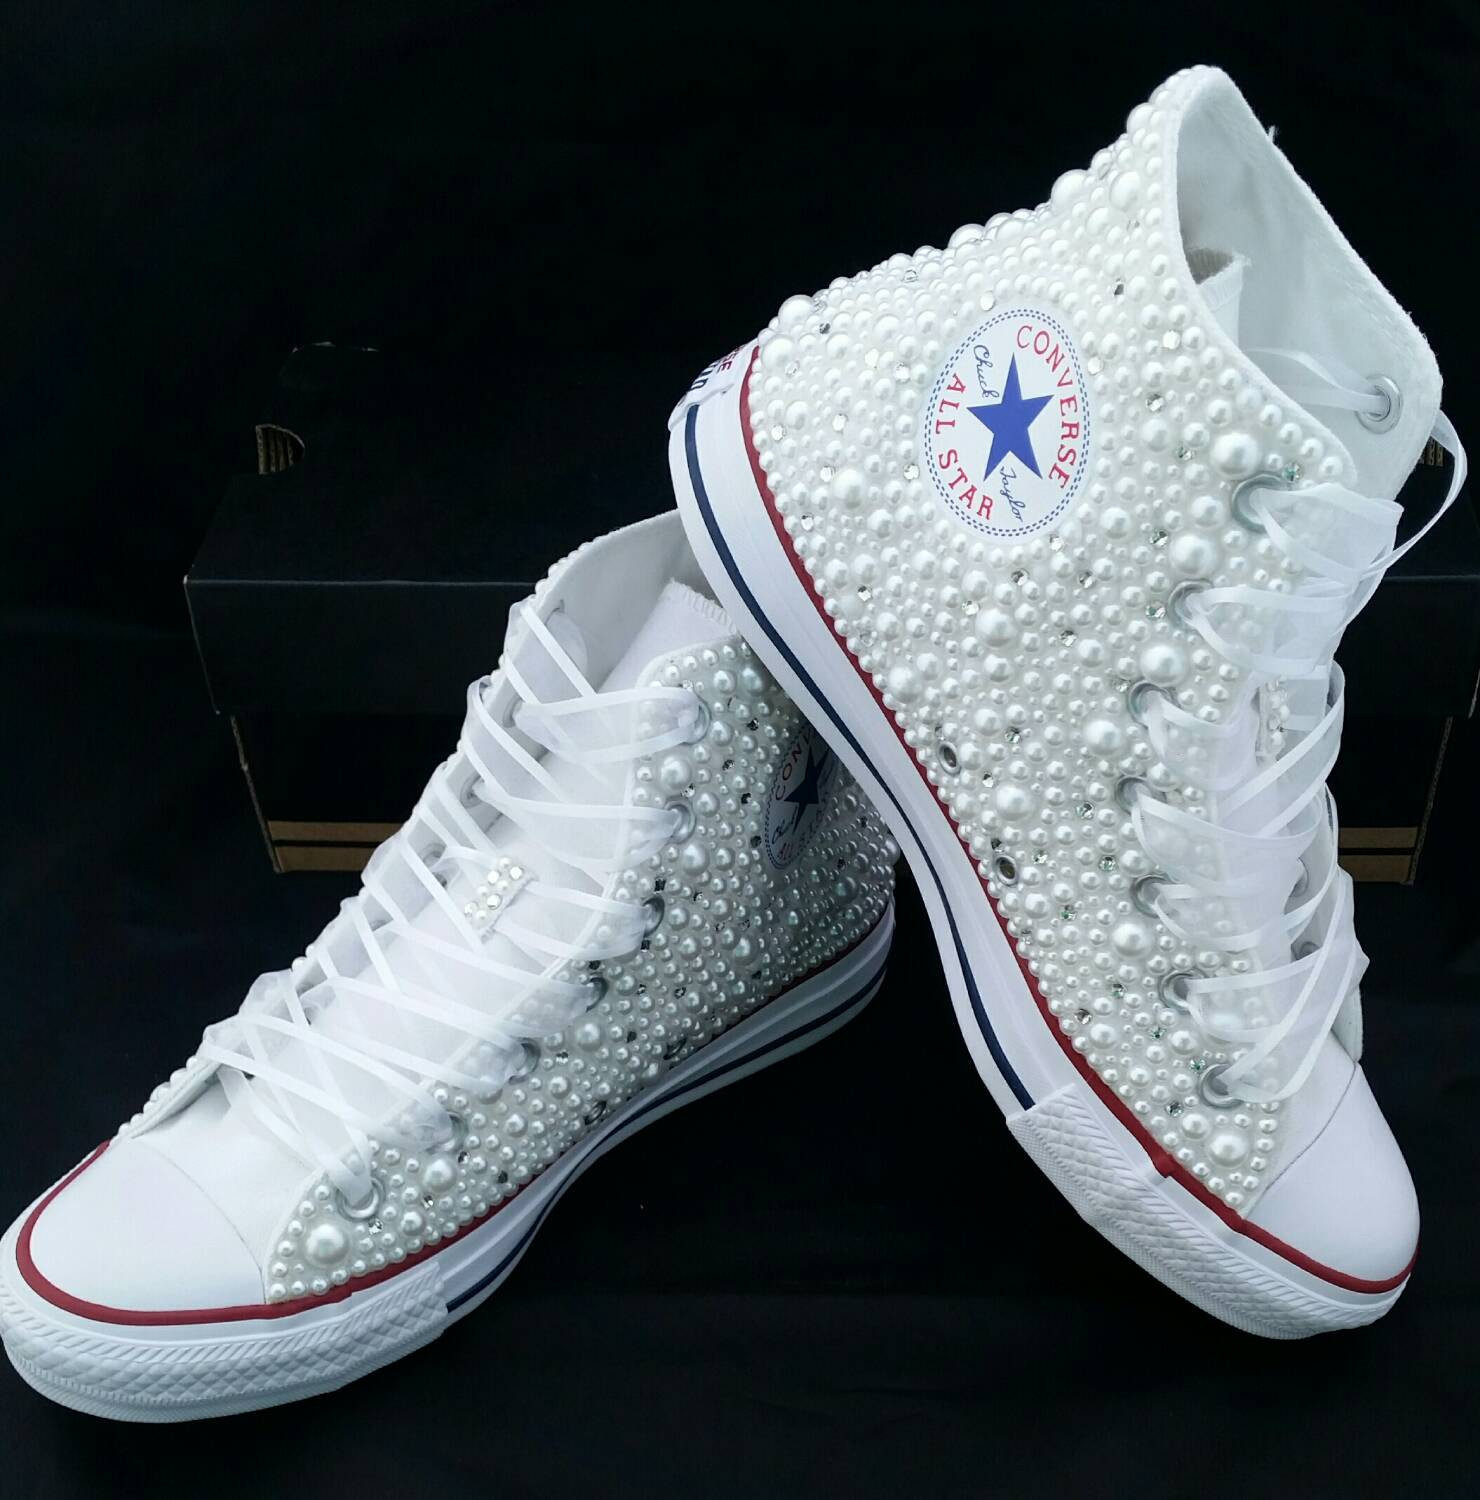 Wedding Converse Shoes
 Bridal Converse Wedding Converse Bling & Pearls by